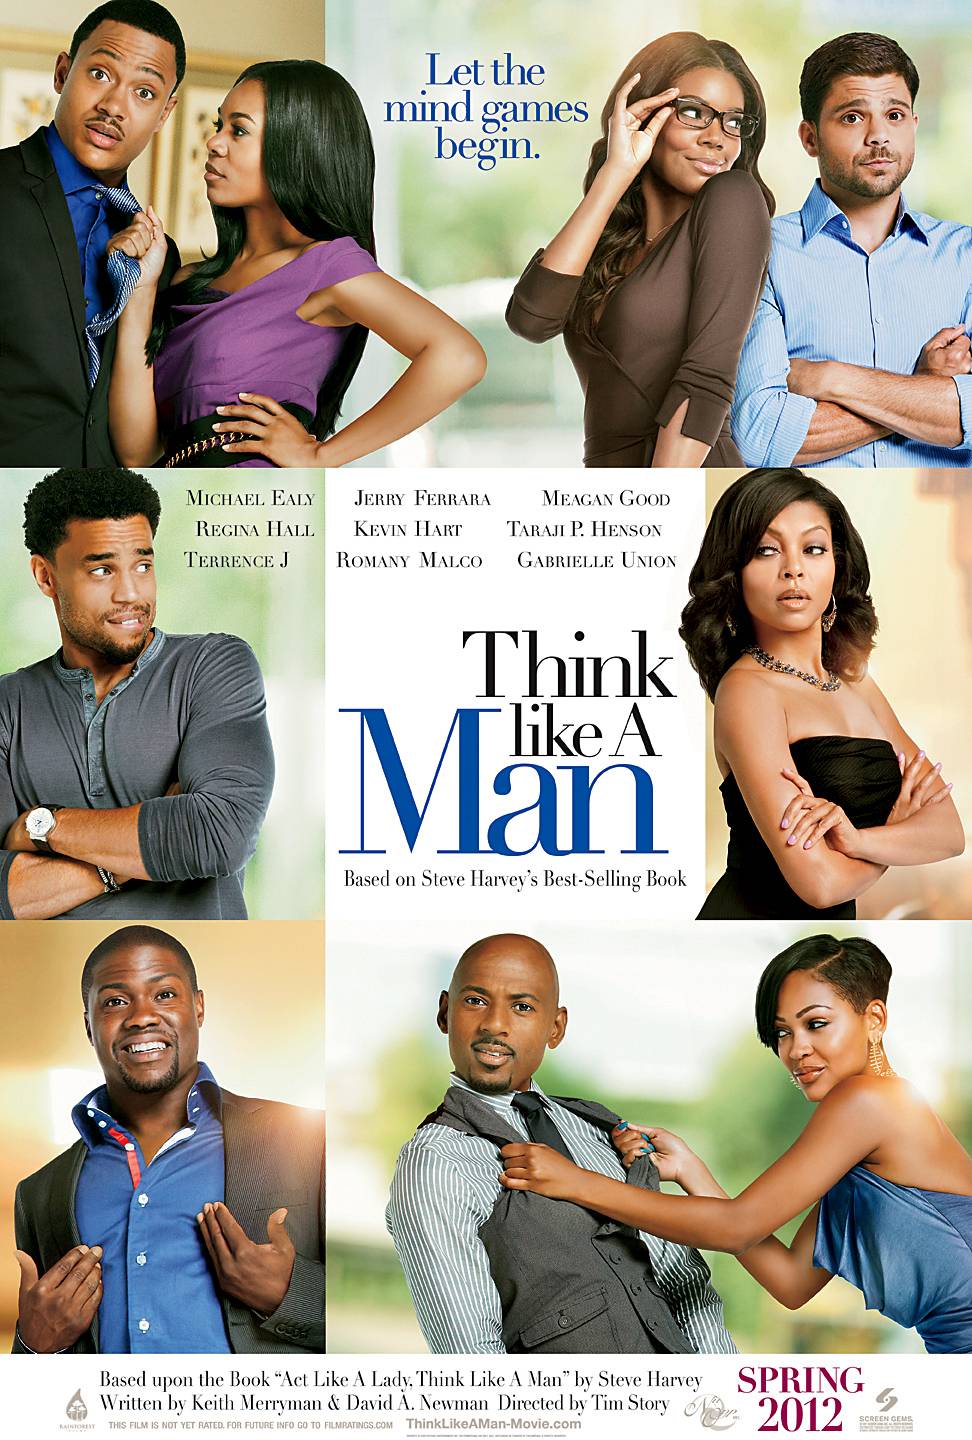 Think Like a Man (2012) - Despite conventional wisdom to the contrary, Black films have a long history of coming in No. 1 at the box office. Think Like a Man is just the latest, scoring a&nbsp;$33 million opening weekend and knocking&nbsp;Hunger Games&nbsp;out of the top spot.&nbsp;Even though insiders had a hunch this rom-com would do well at the box office, nobody could have anticipated just how well.&nbsp; Check out our list of memorable films that topped the box office.(Photo: Courtesy Screen Gems)